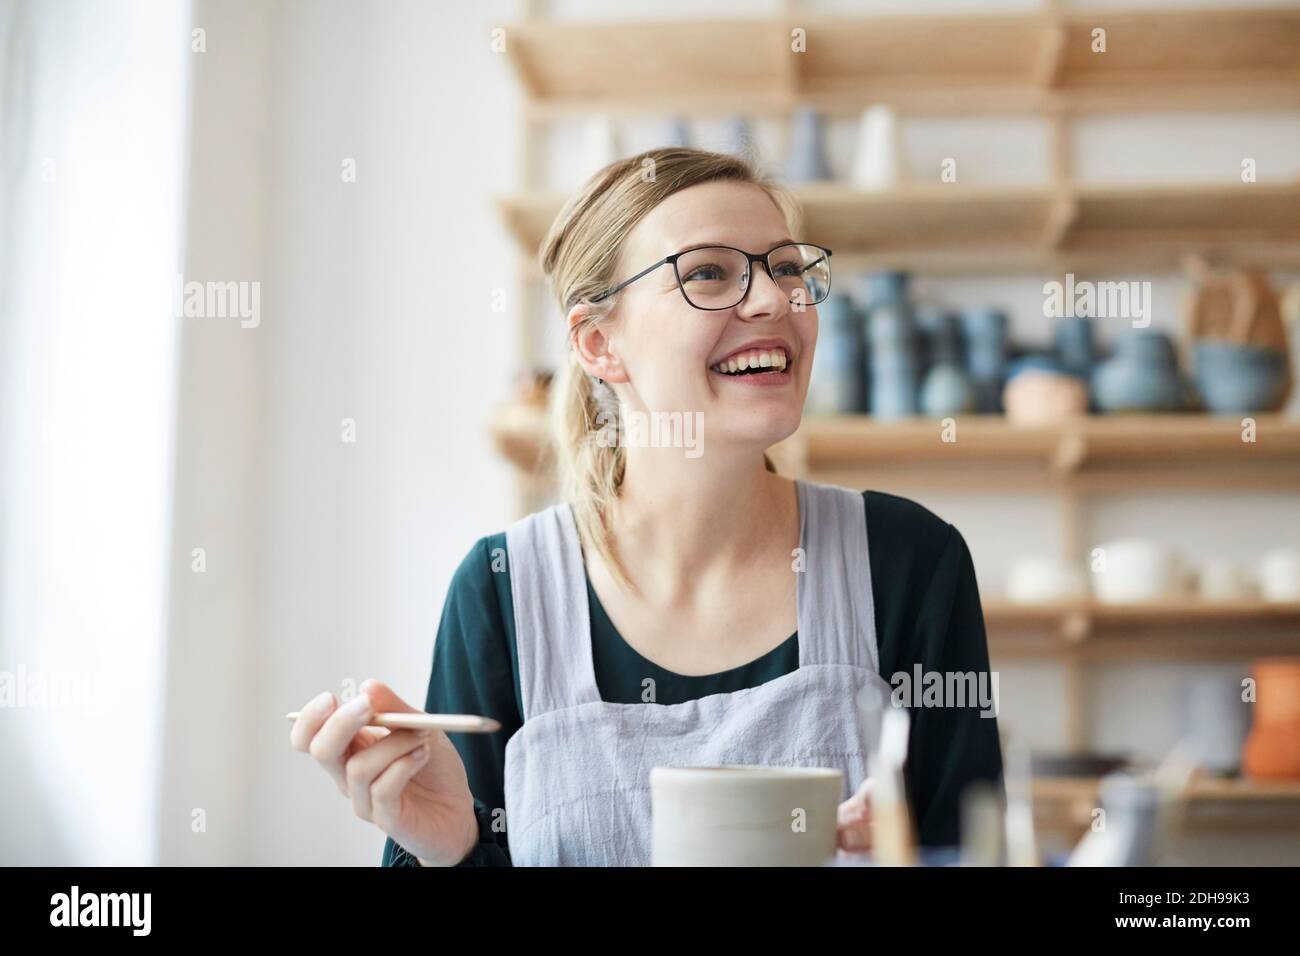 Smiling young woman looking up while learning pottery in art studio Stock Photo